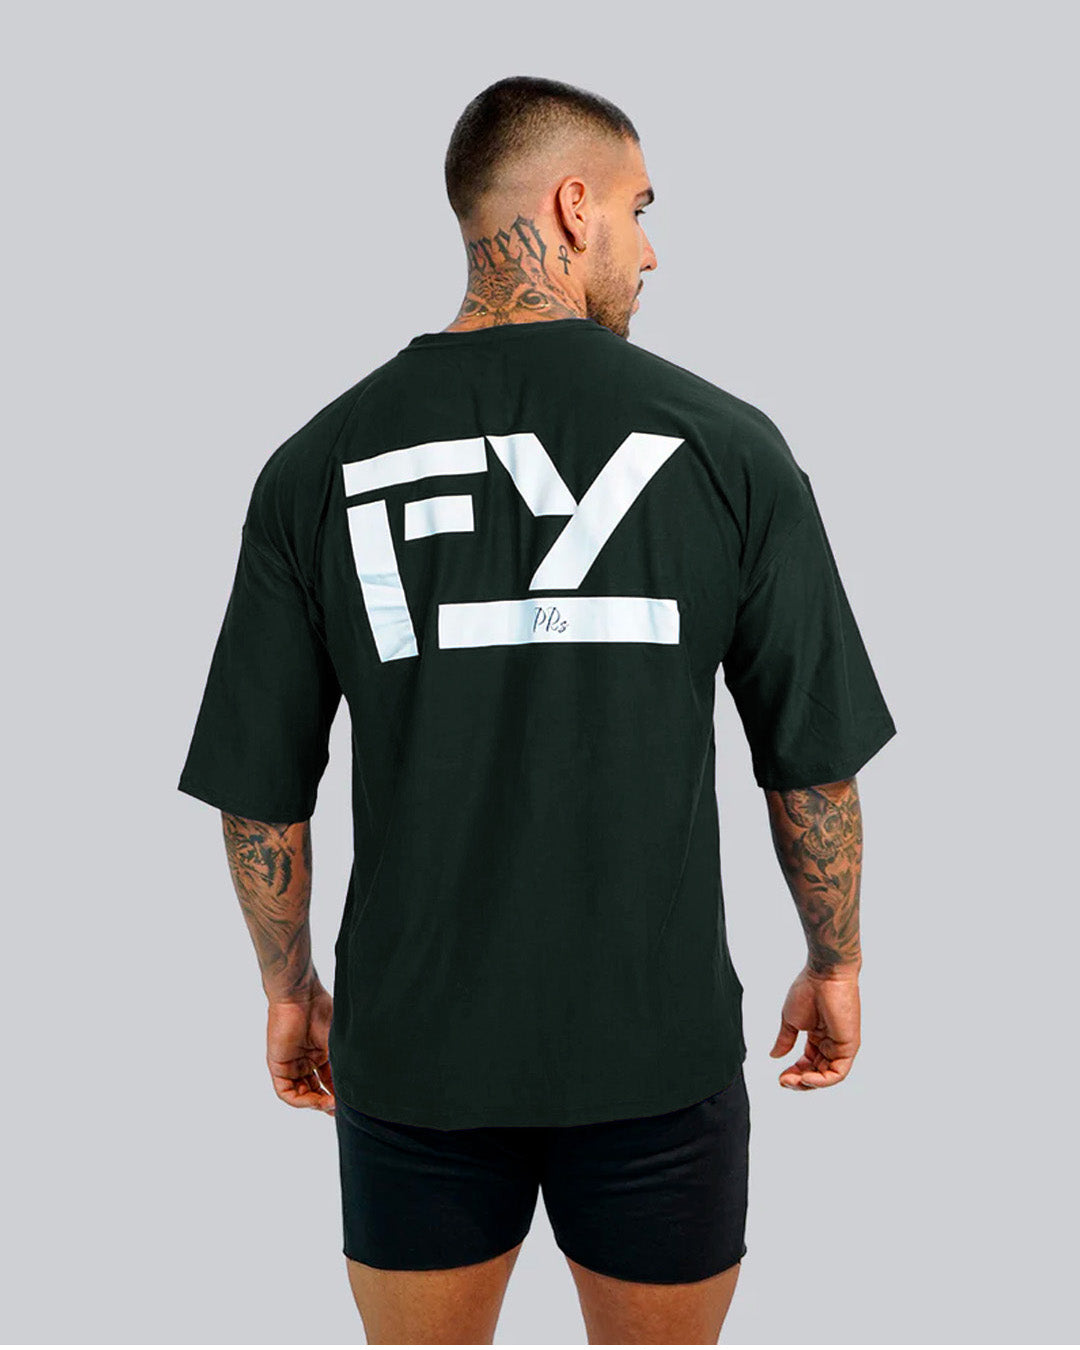 OVERSIZE FYP - GREEN ARMY